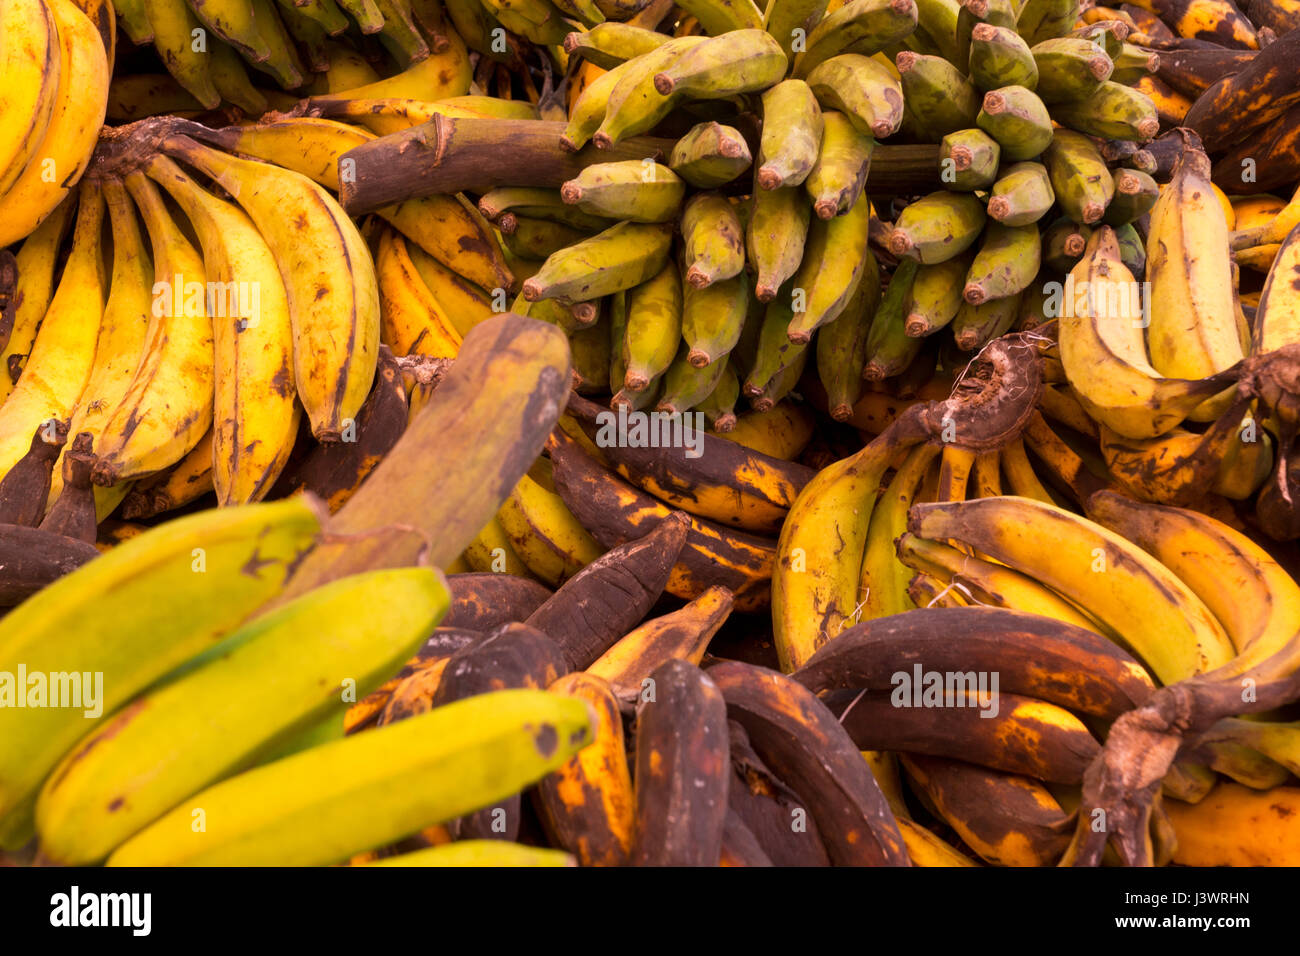 brazilian markets offer a huge  variation of fruits and vegetables Stock Photo